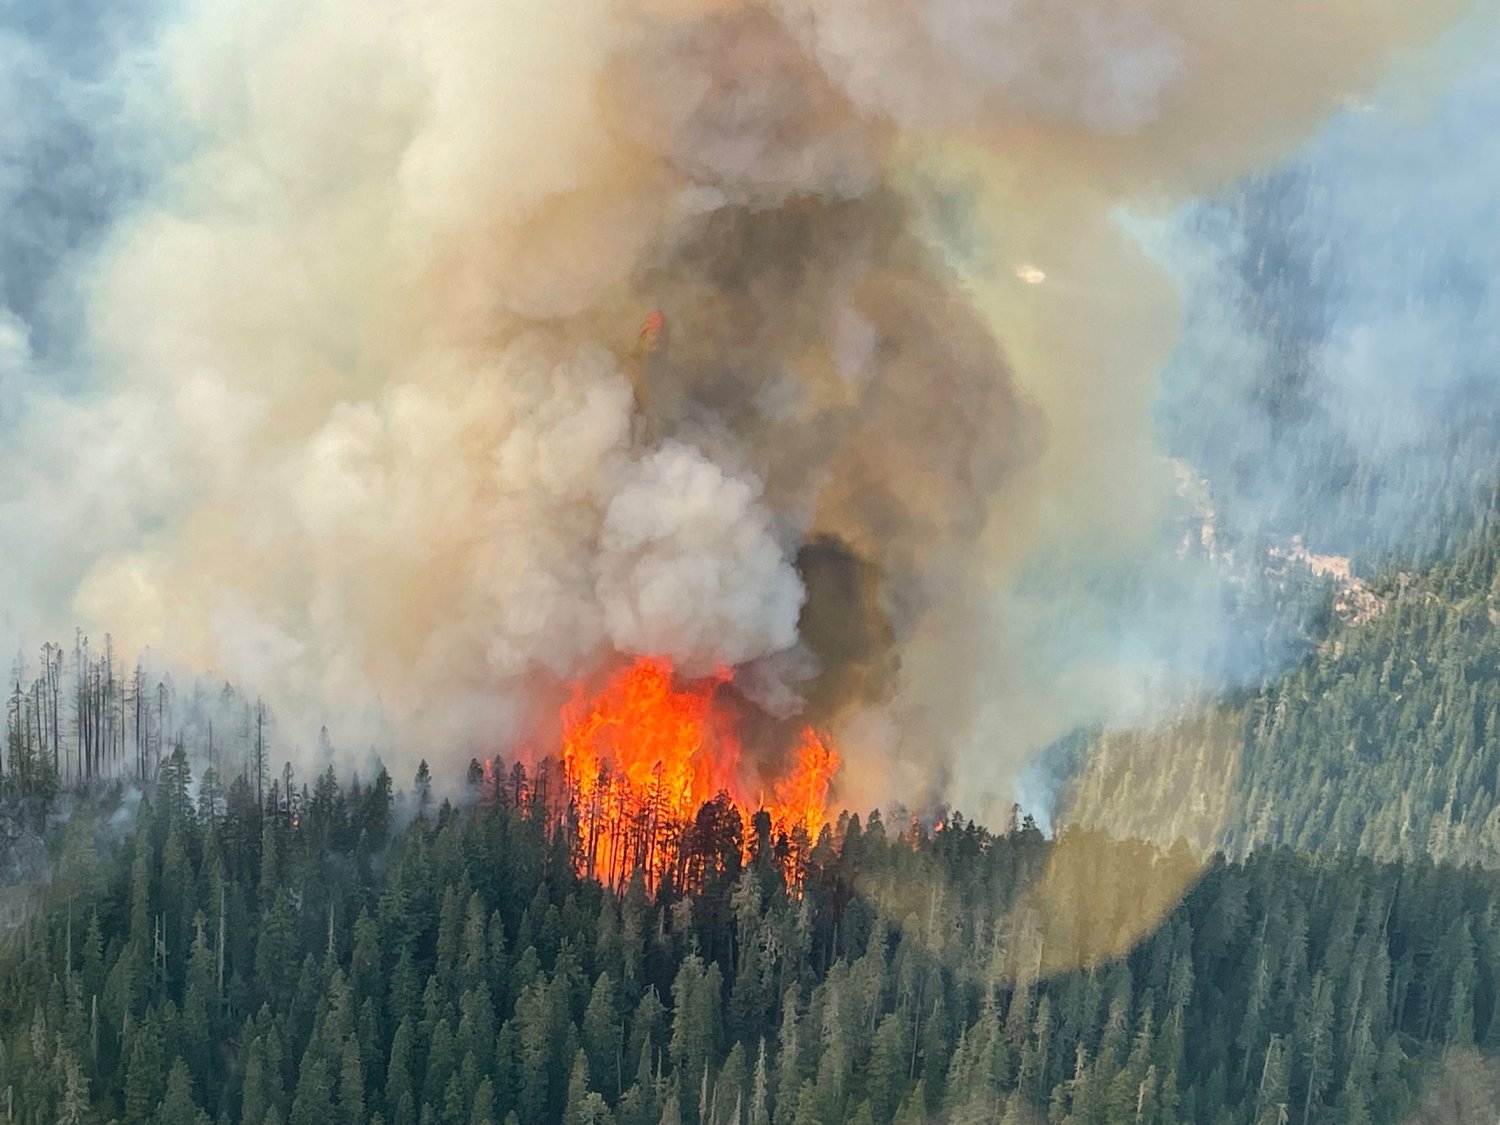 The Goat Rocks Wilderness Fire roughly 7 miles northeast of Packwood has grown to 80 acres. 